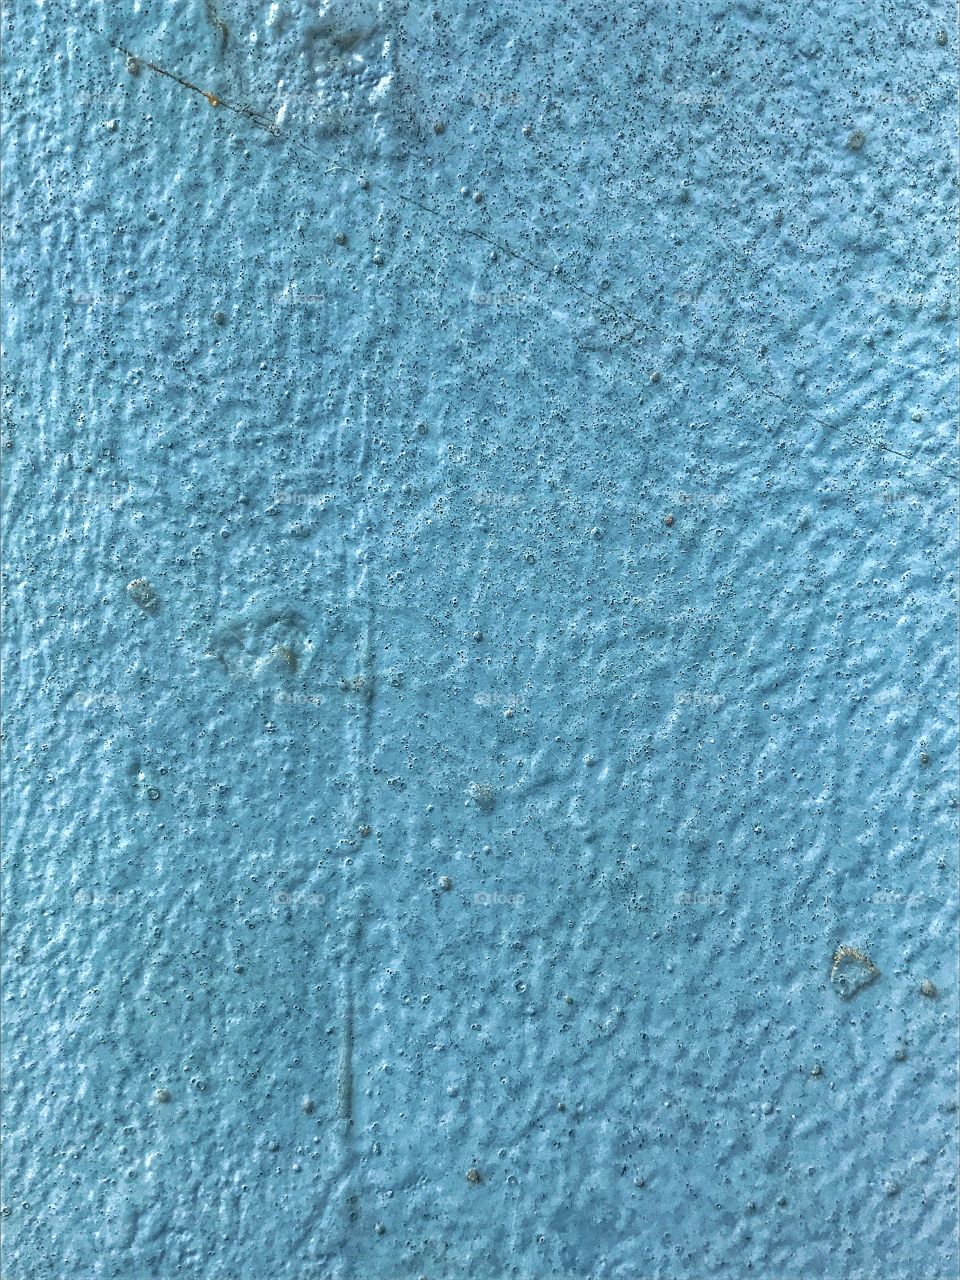 Blue stone wall texture/background 